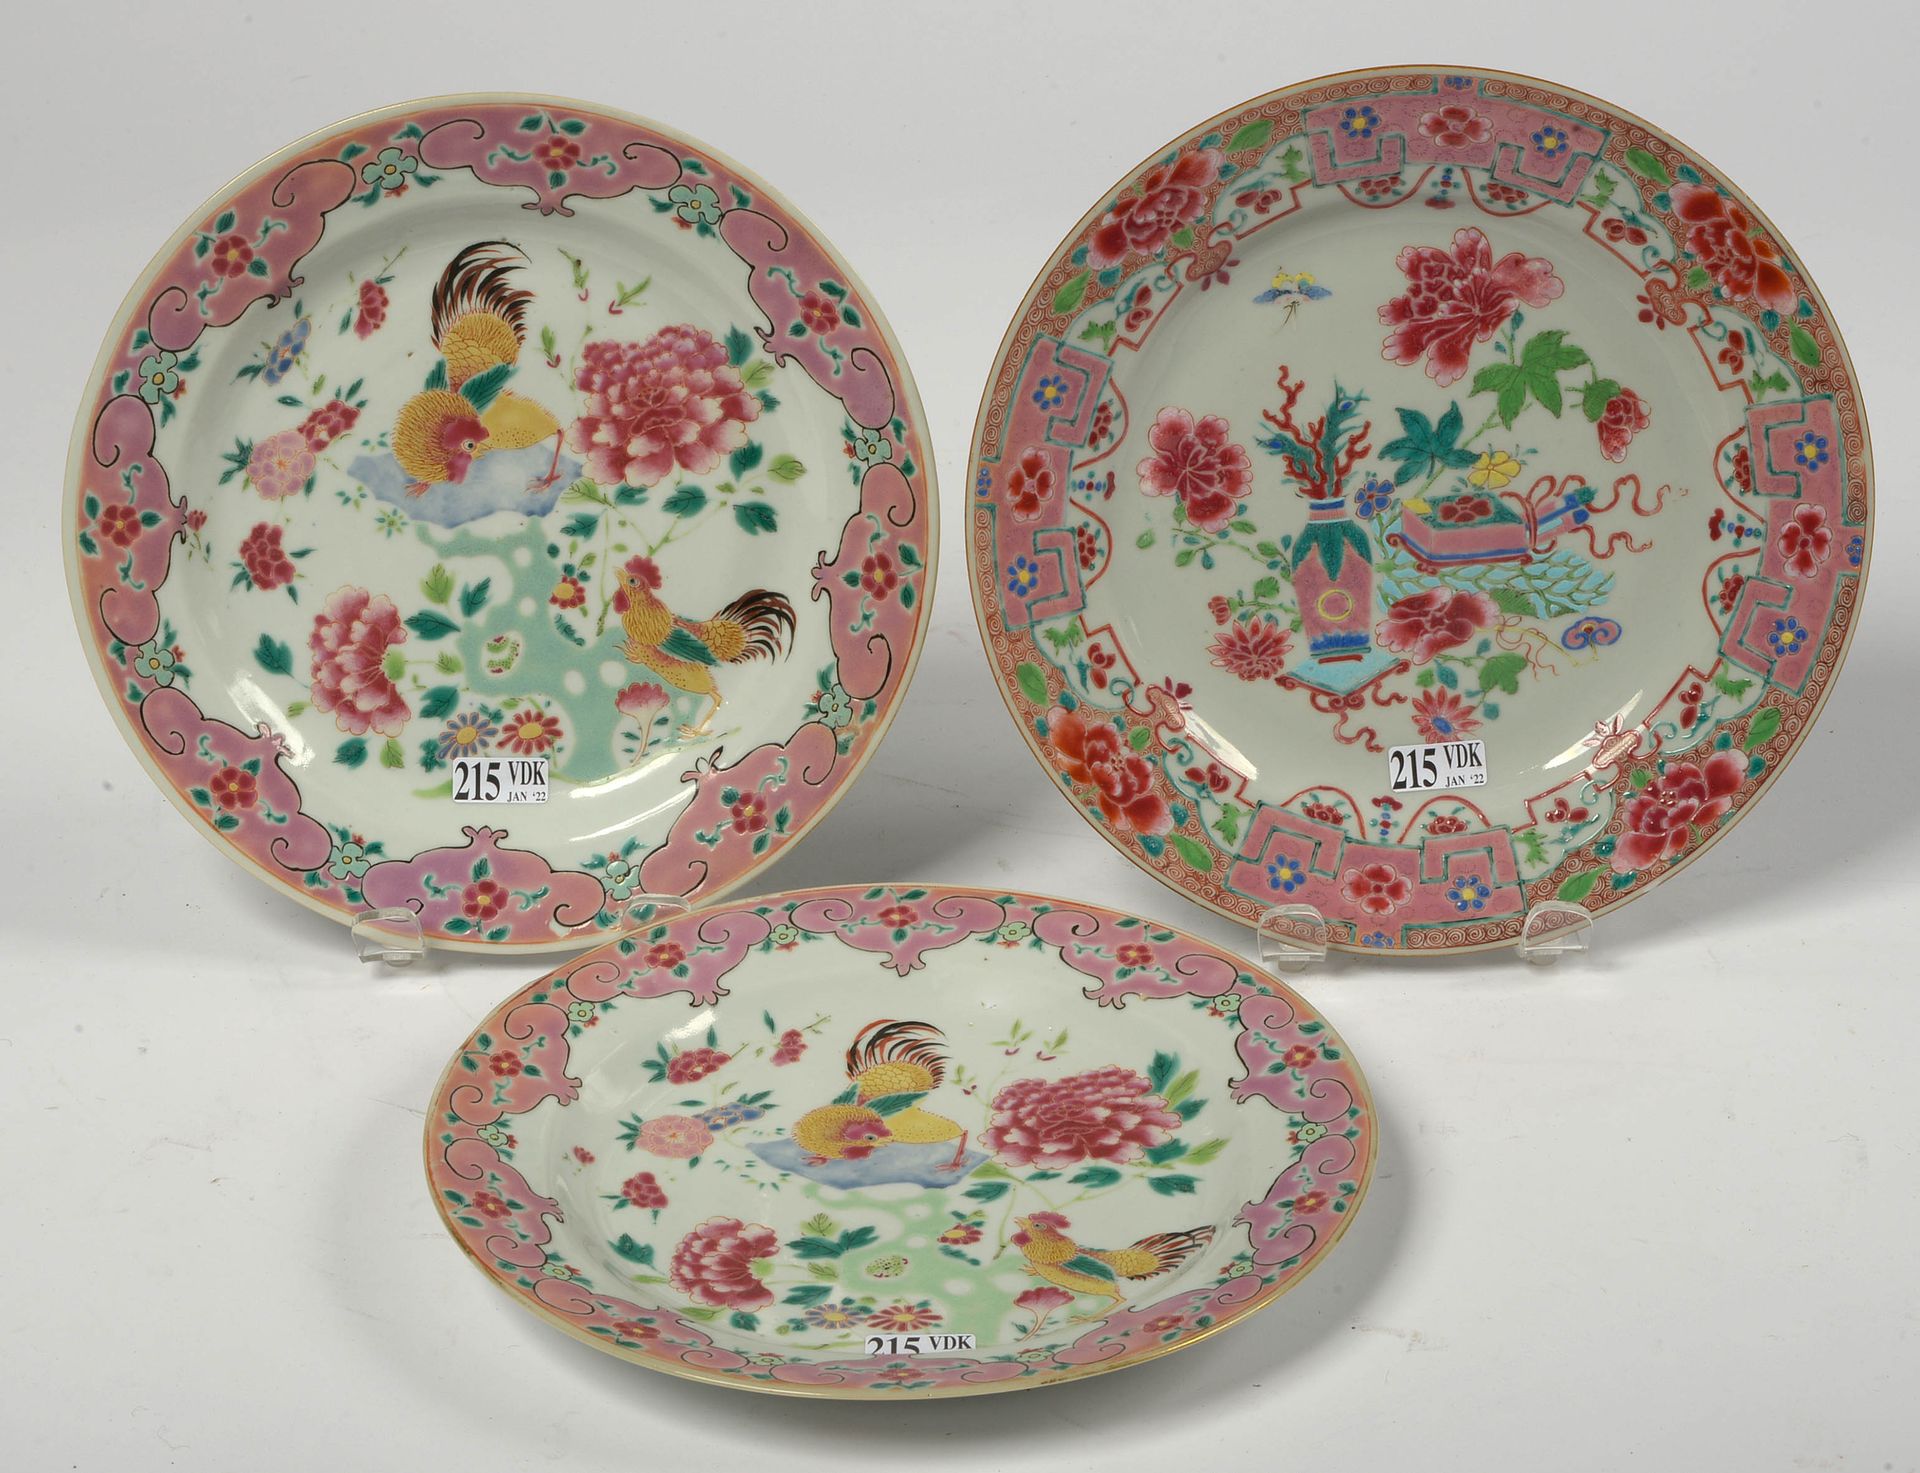 Null Set of three Chinese polychrome porcelain plates called "Famille rose" incl&hellip;